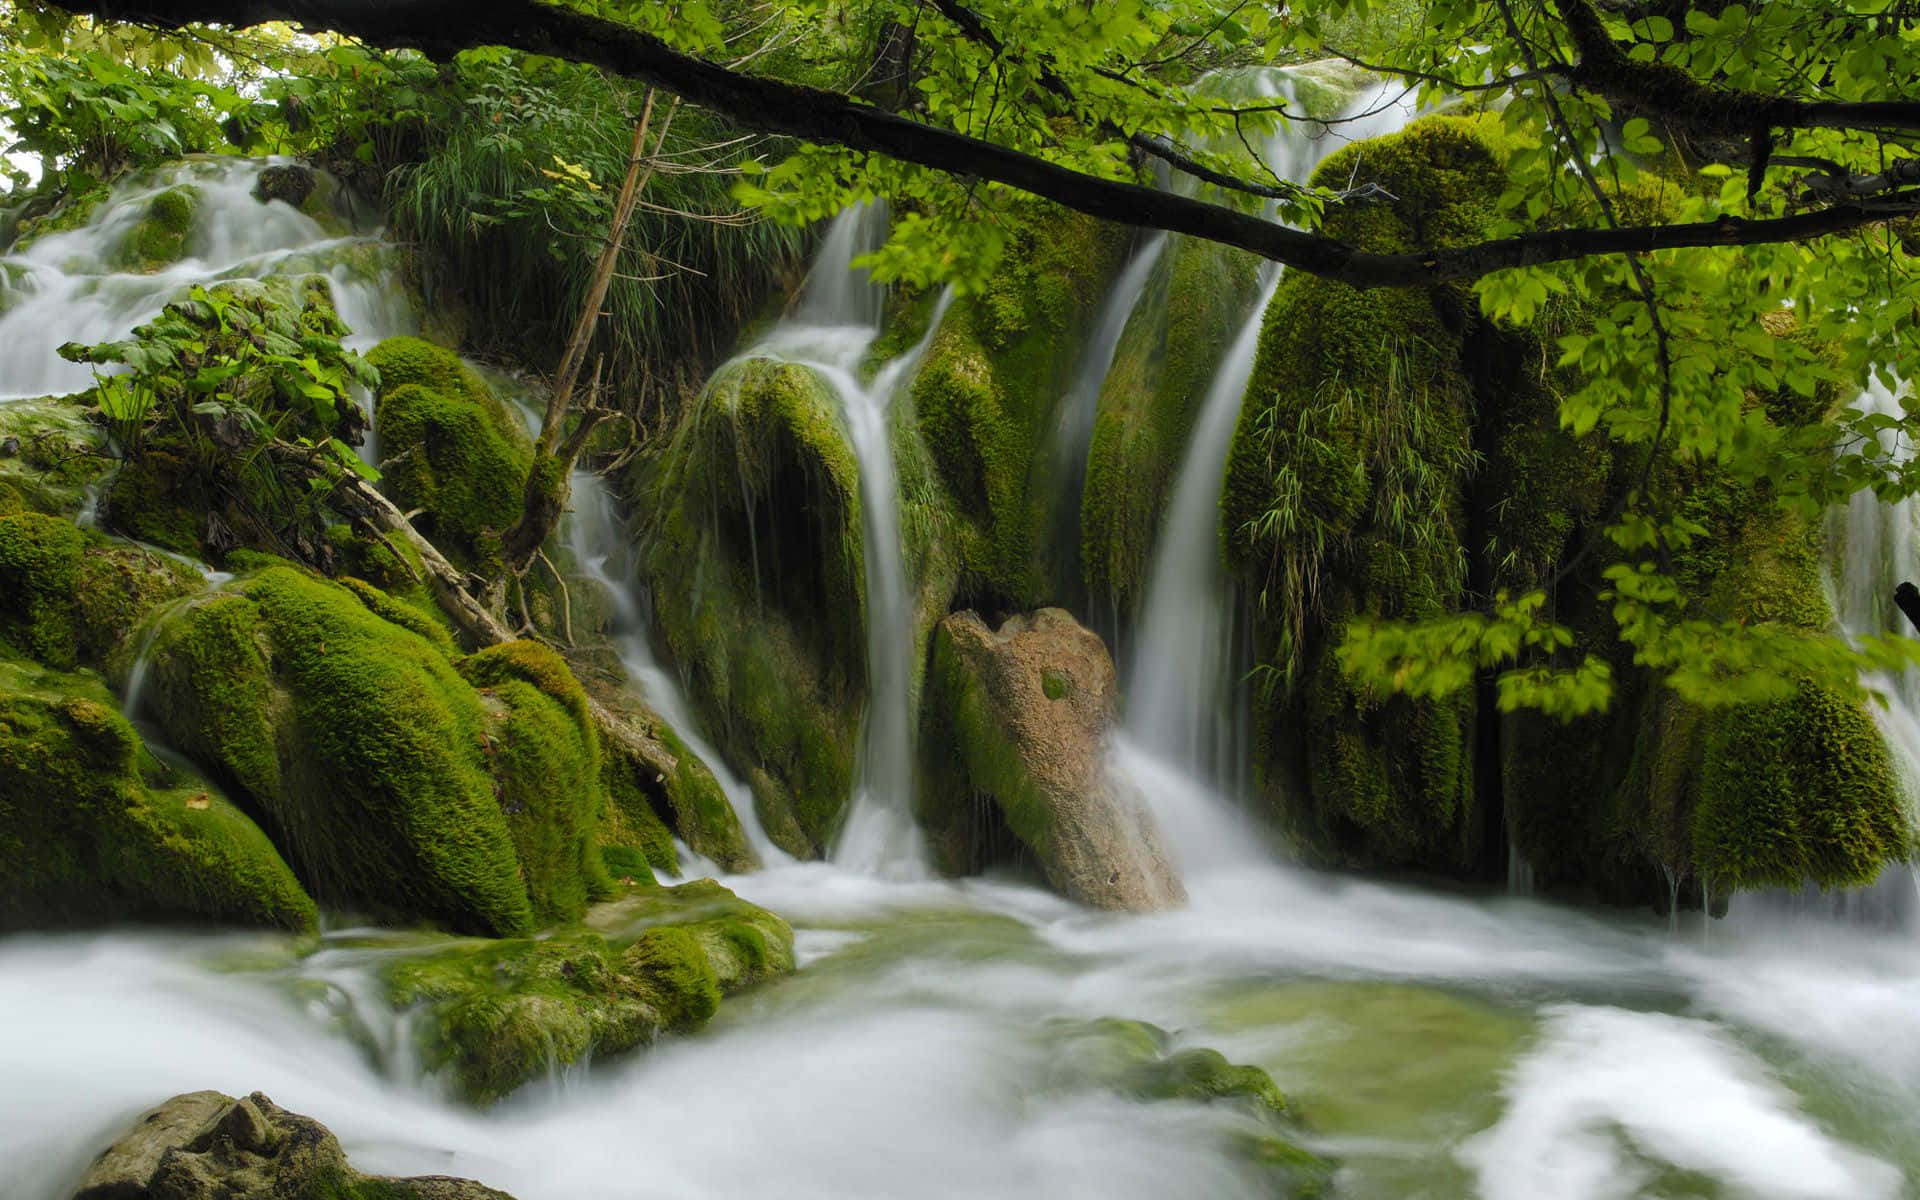 a waterfall in a green forest with mossy rocks